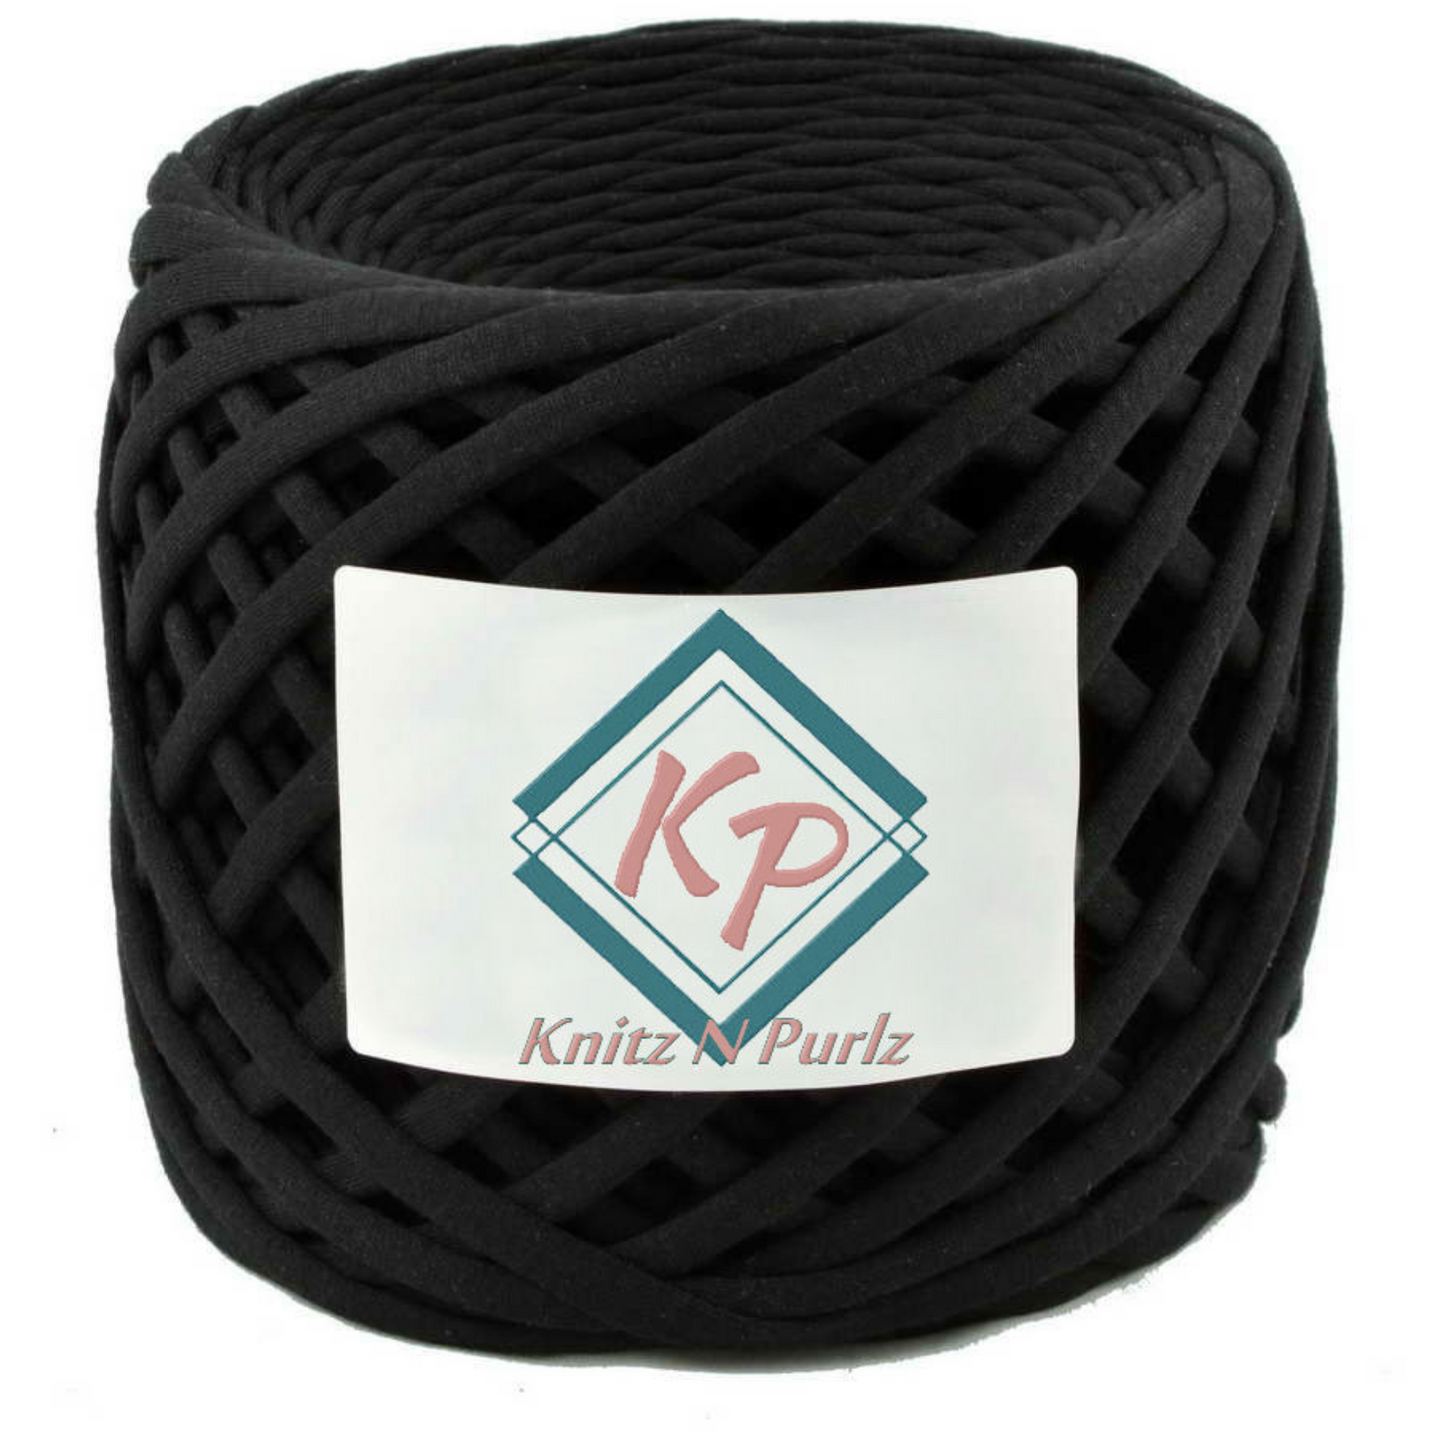 T-shirt yarn for crocheting baskets, bags, rugs and home decor. Black